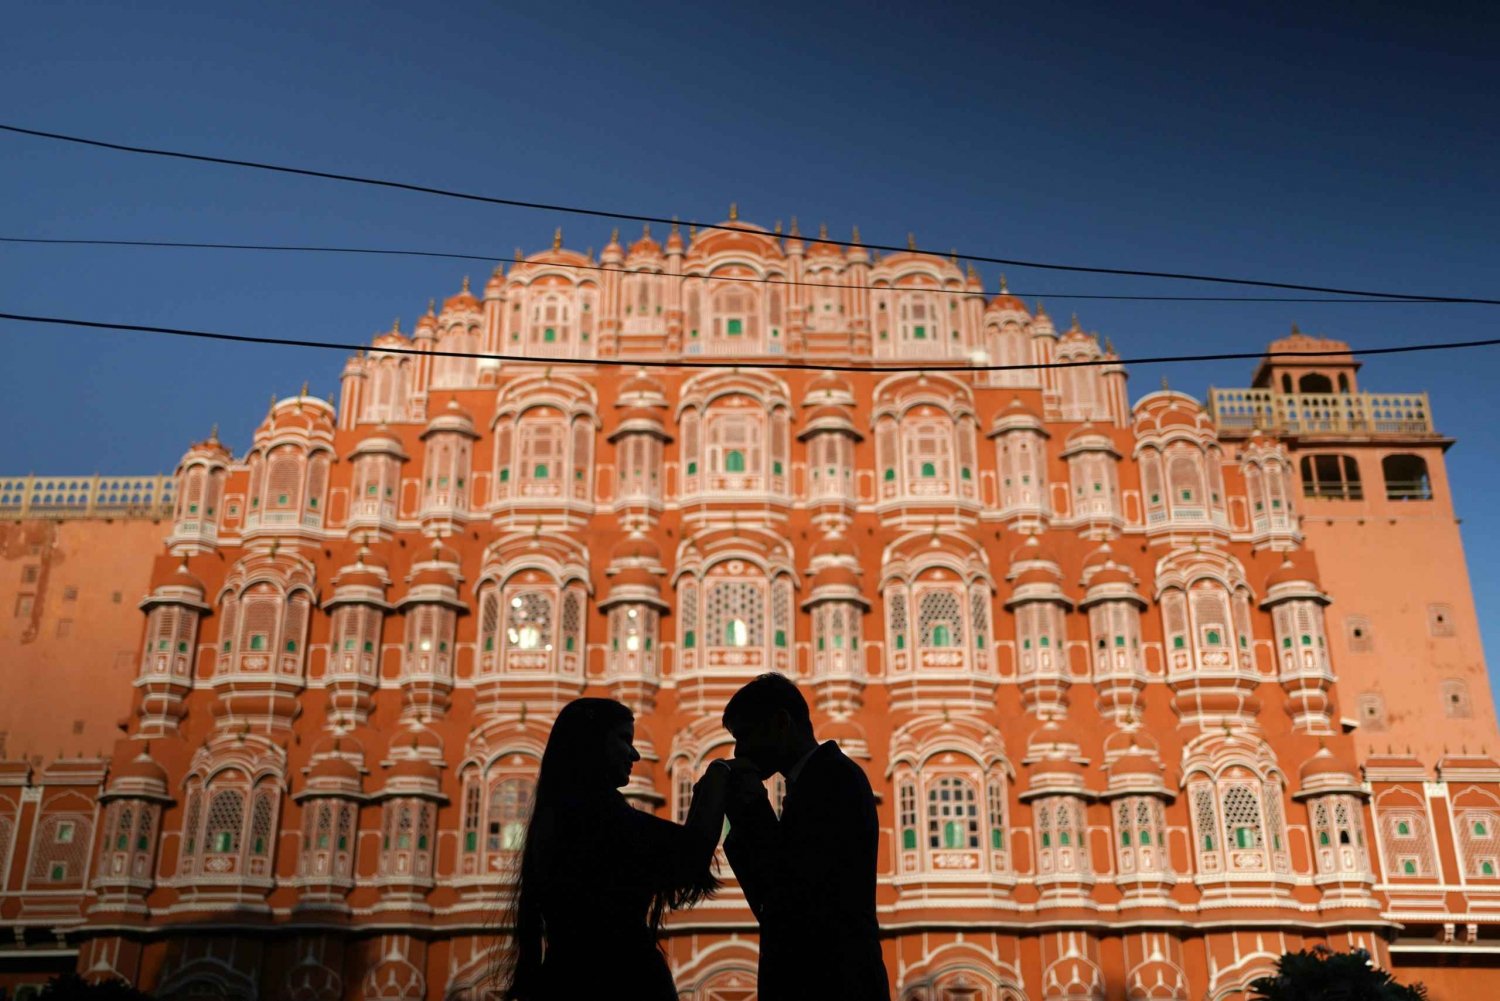 From Delhi: 3-Day Golden Triangle Private Tour with Hotels